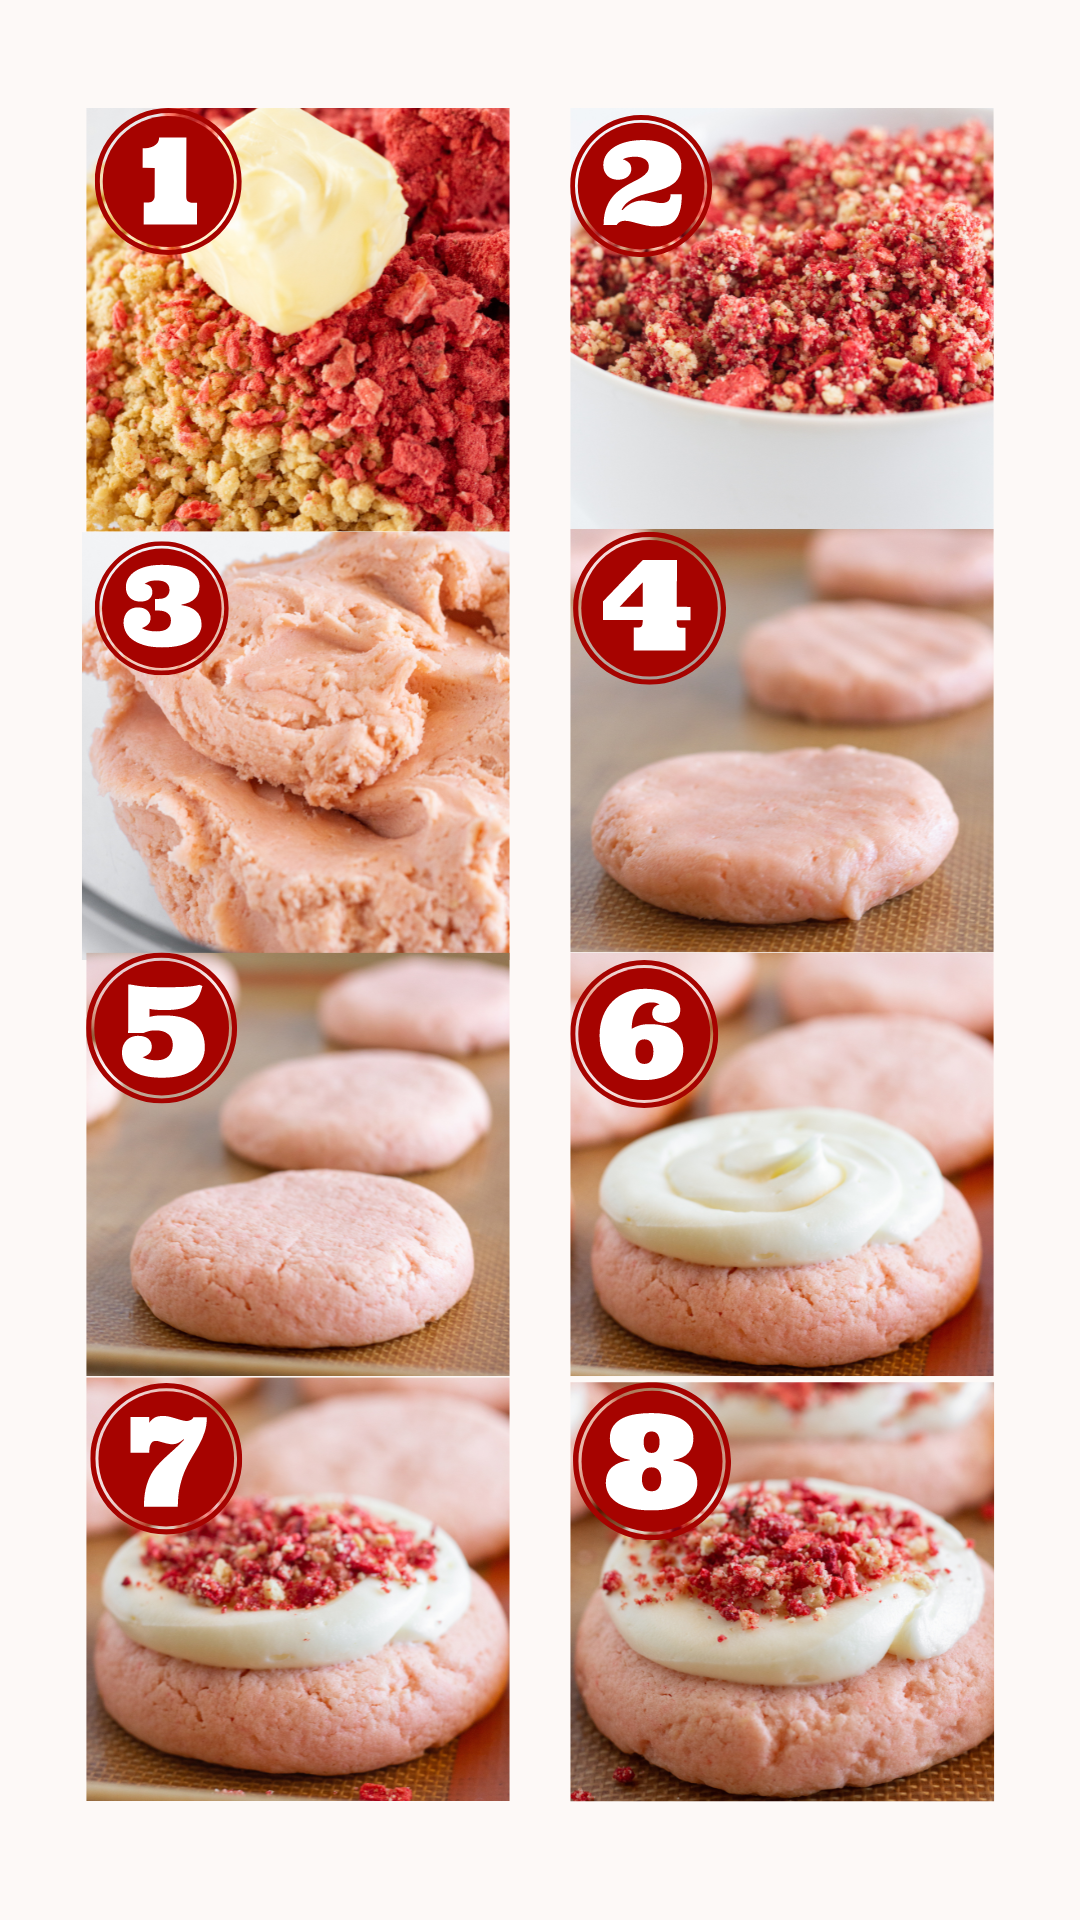 Steps for making Easy Strawberry Crunch Cookies, by Top US cookie blog Practically Homemade